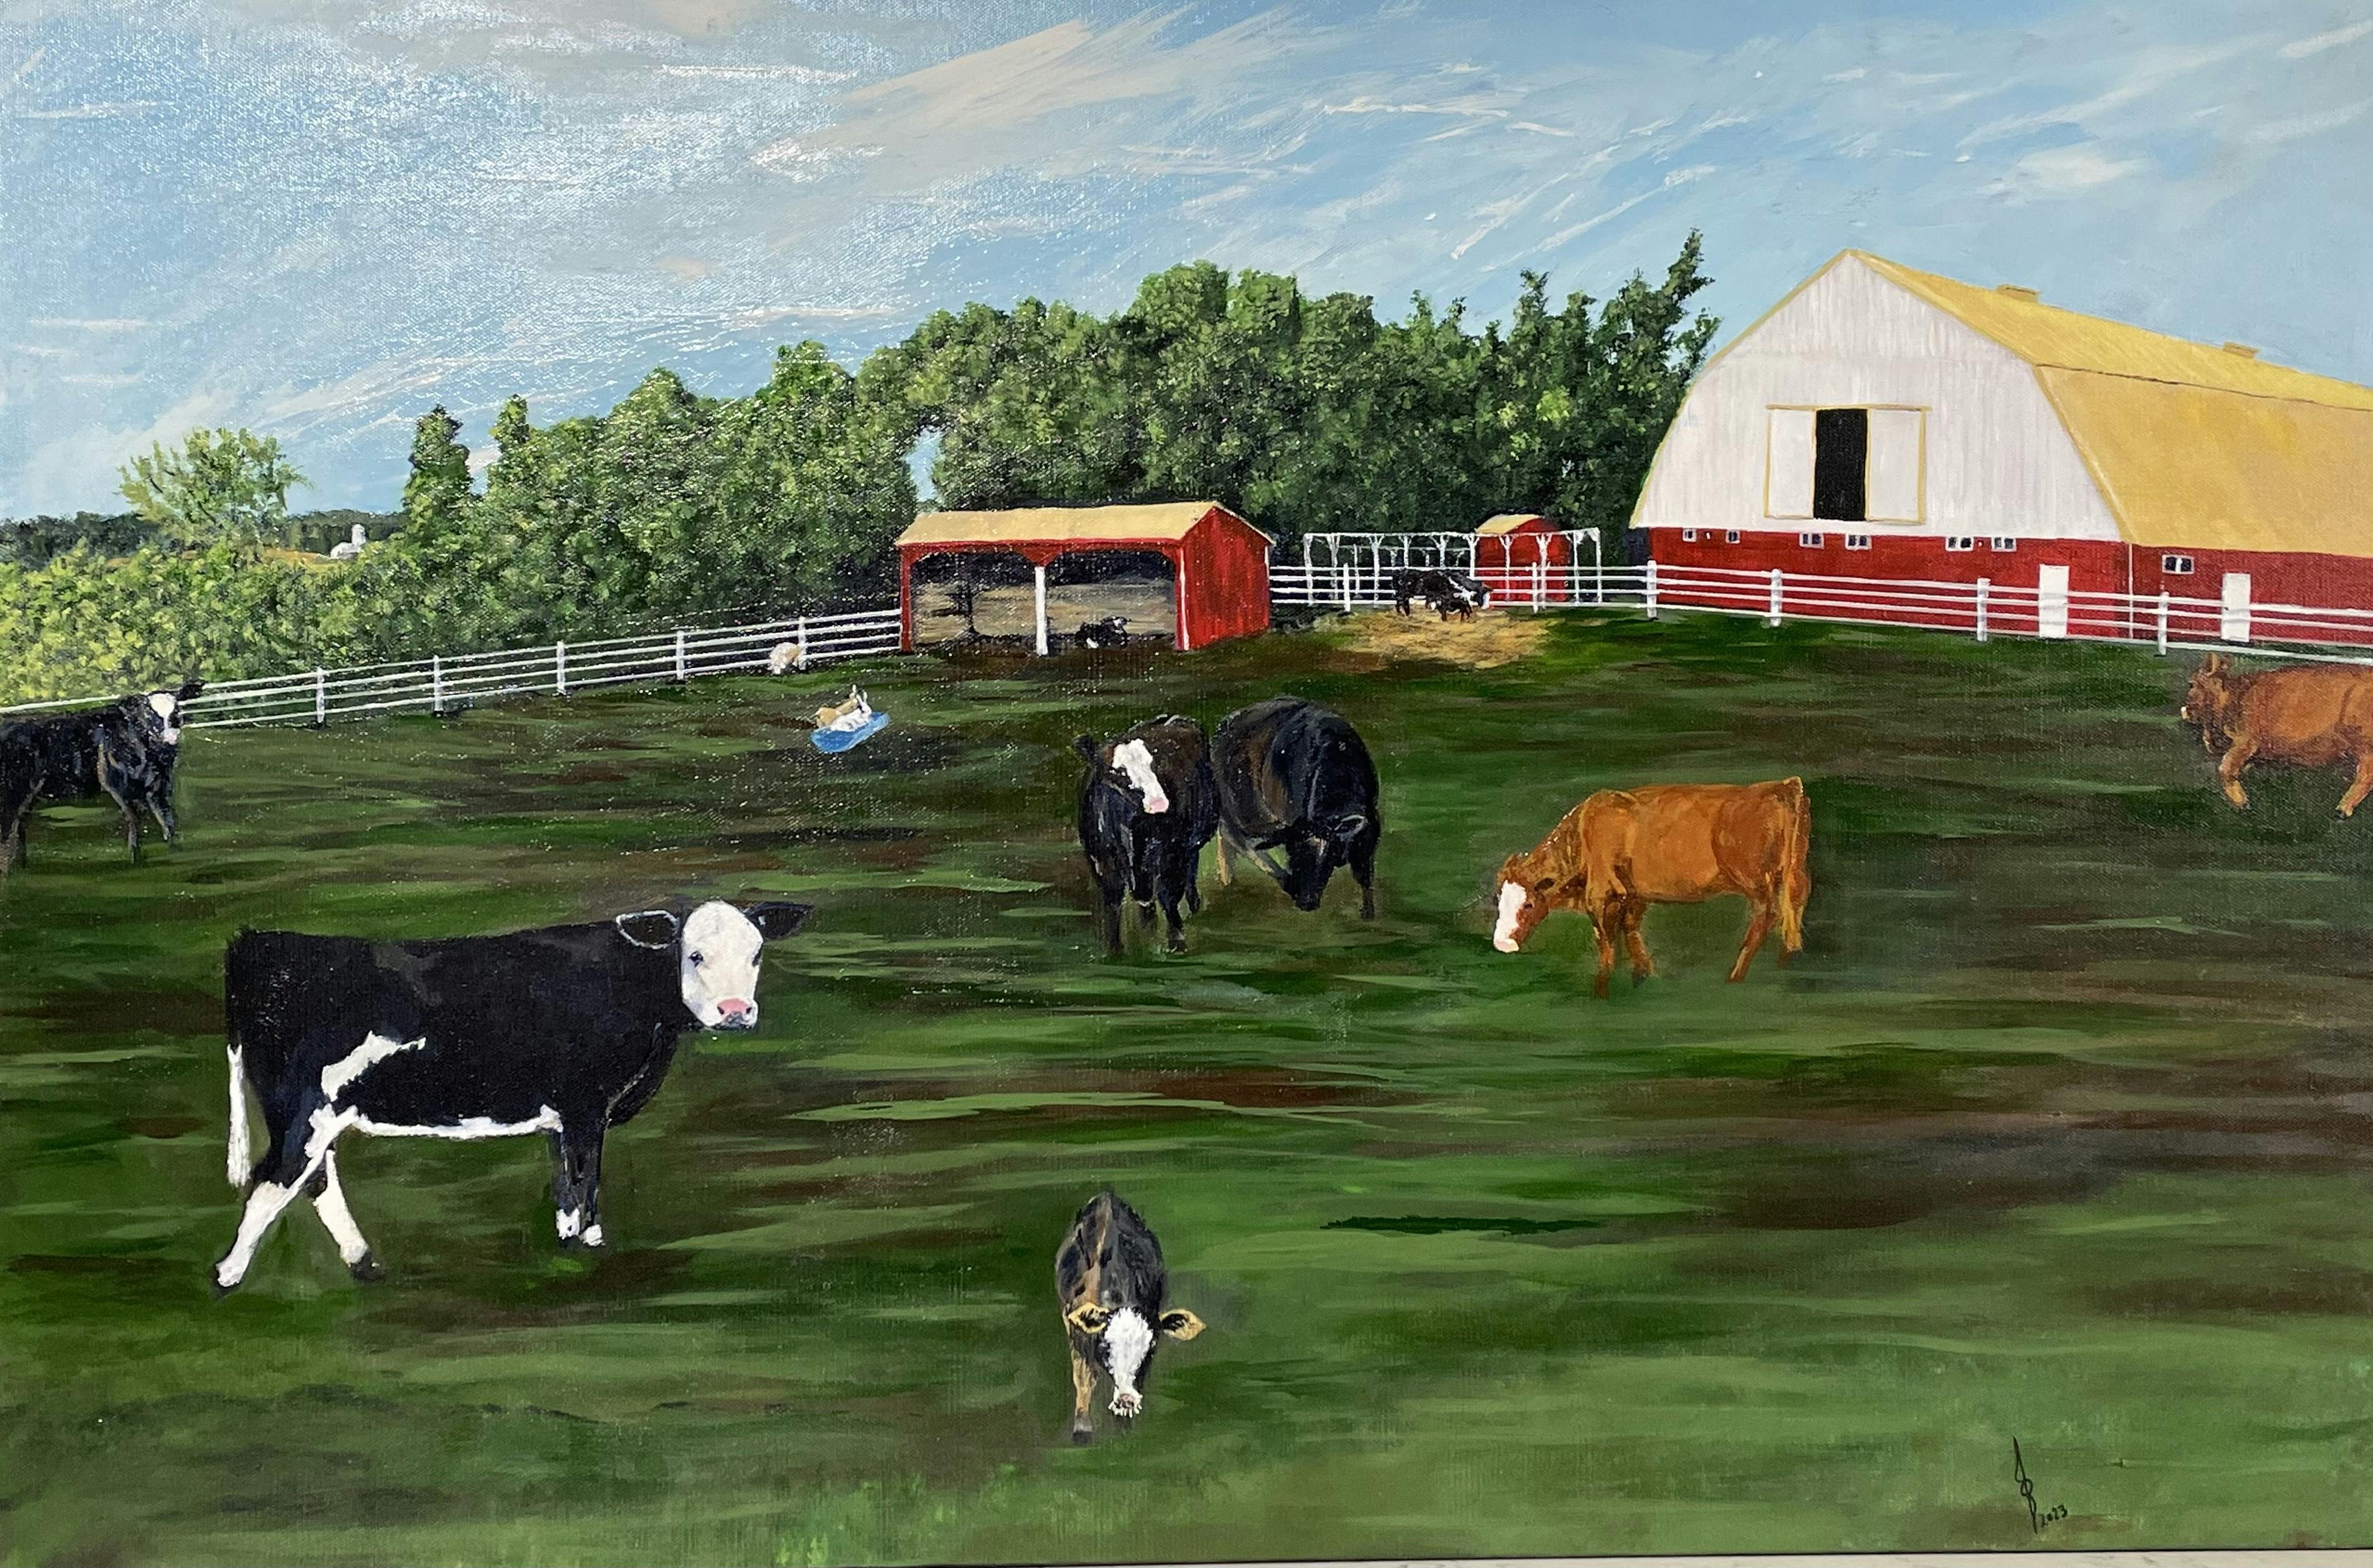 <p>Jacqui Burley, &#8220;Hill Top Farm, Millbrook.&#8221; Acrylic on Canvas, 36” x 24.” 2023 (photo by Jacqui Burley for the Gazette)</p>
